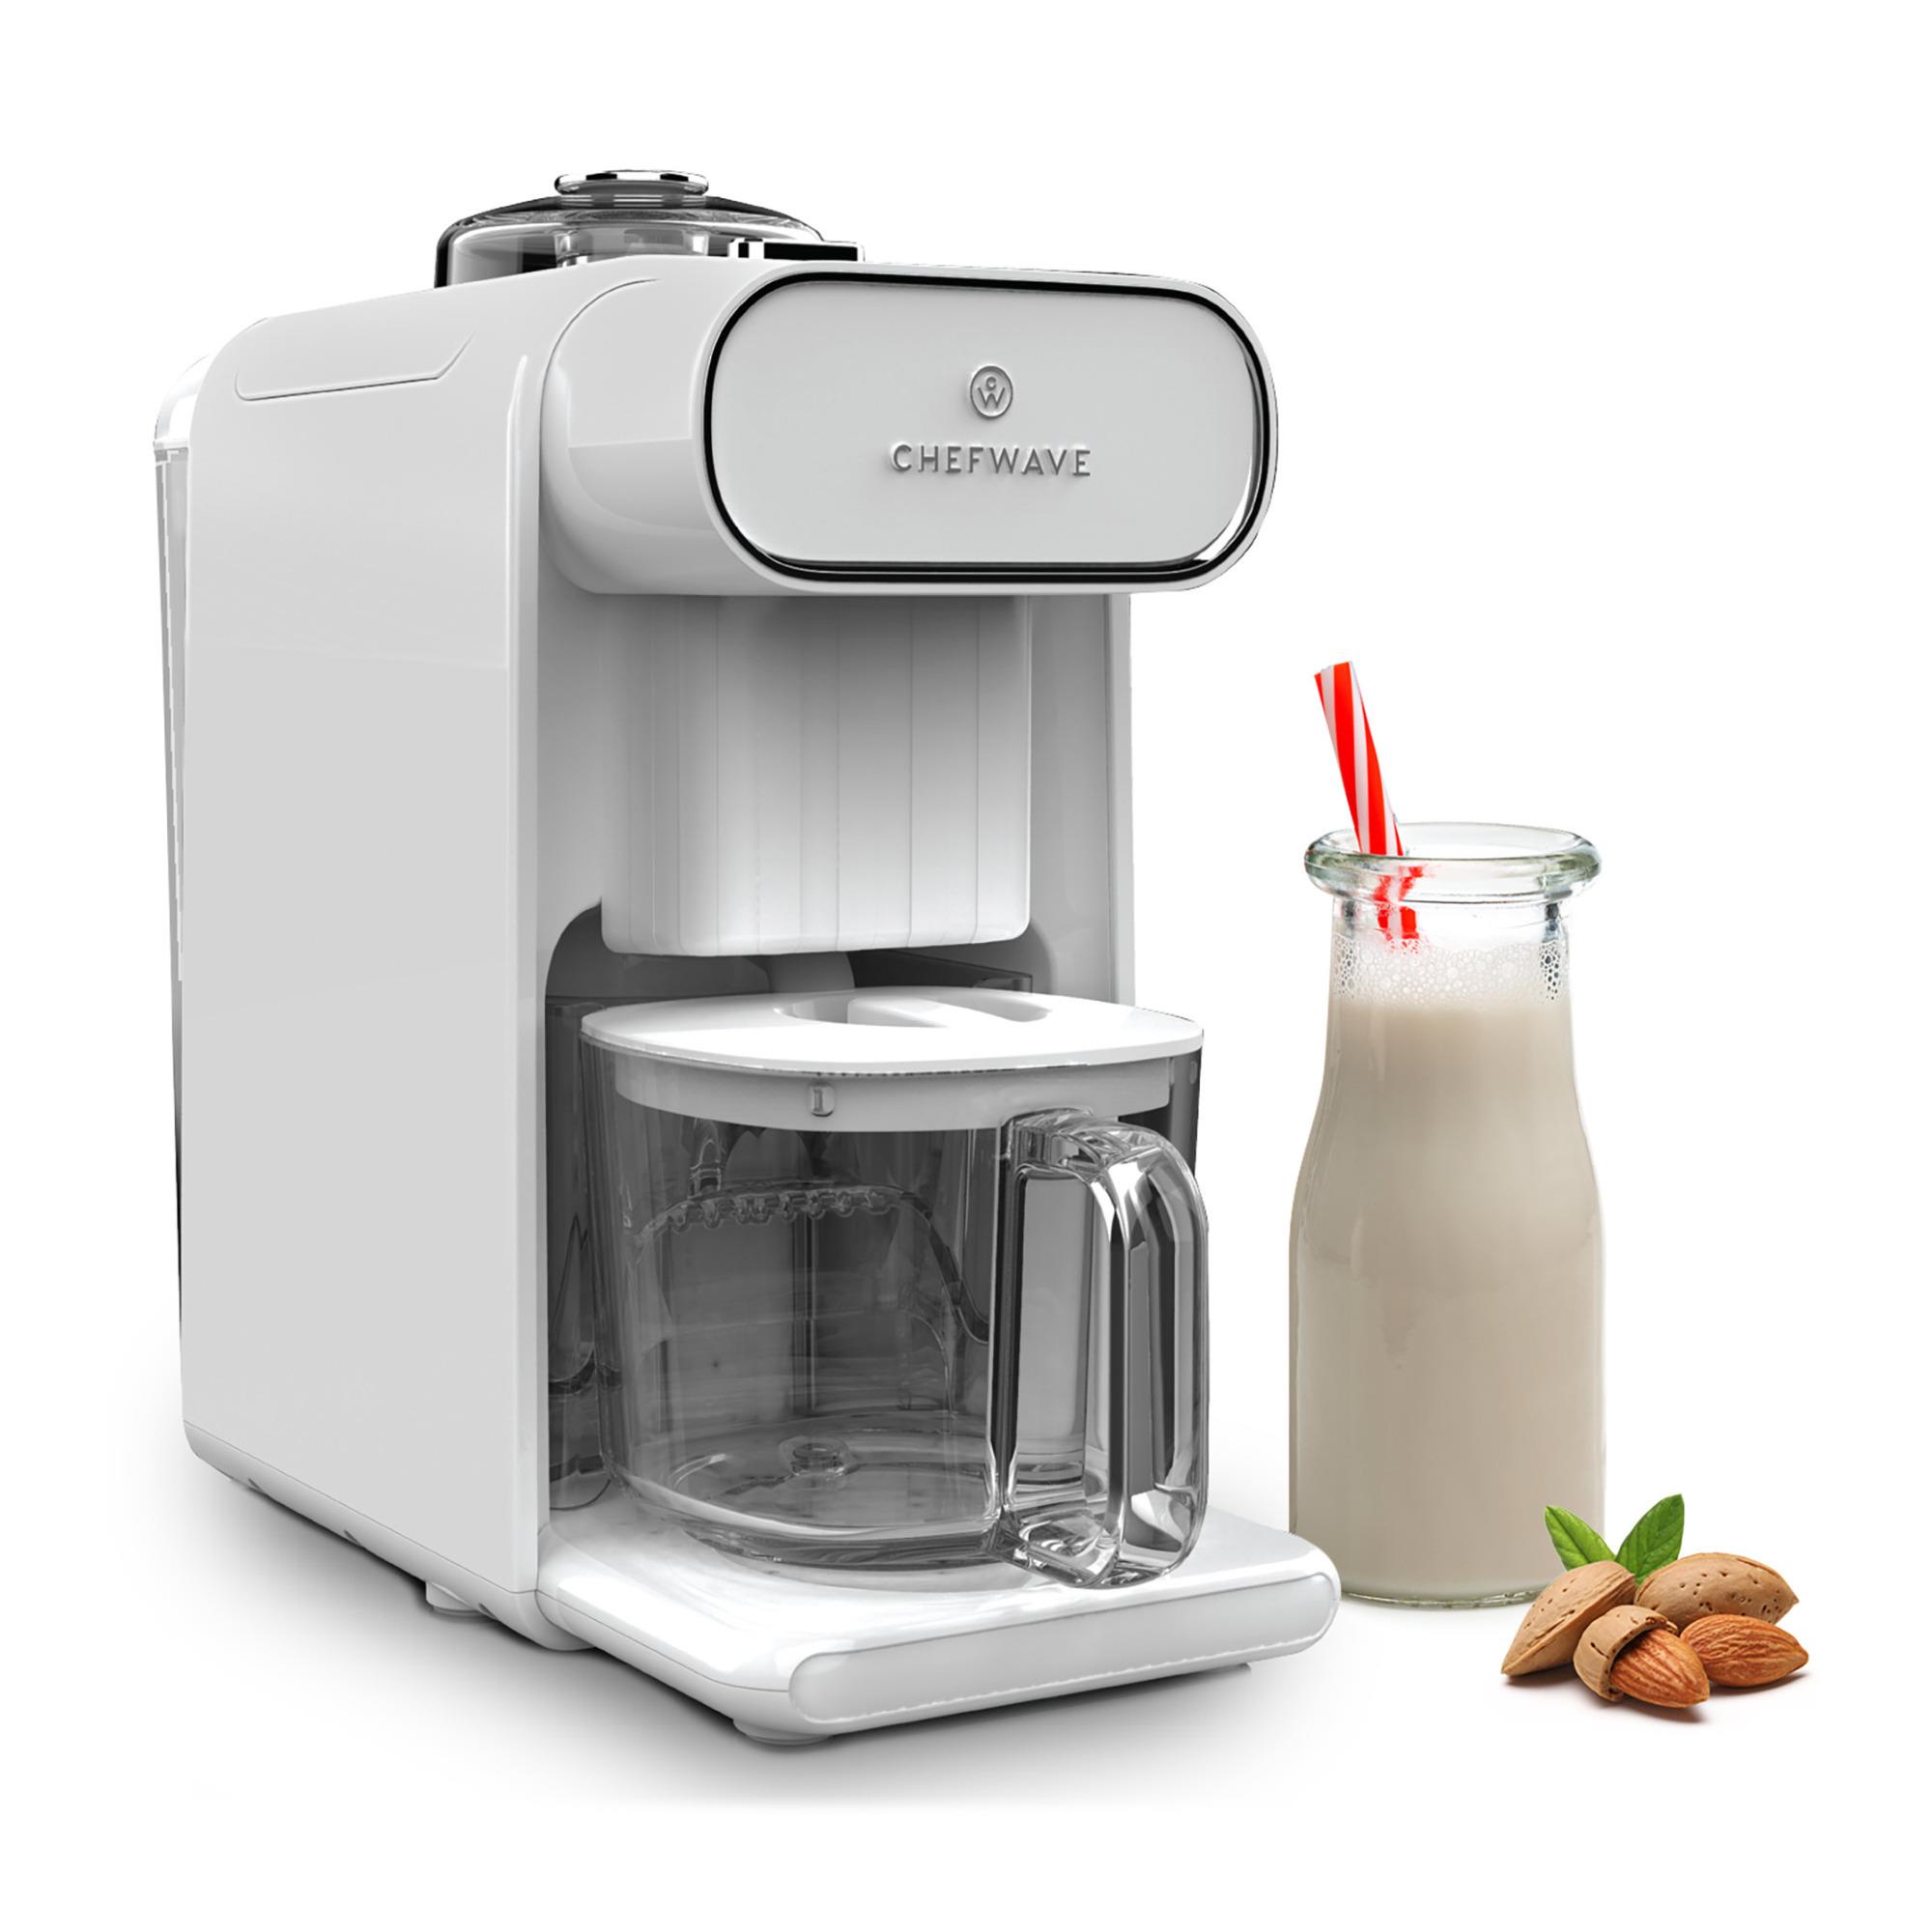 ChefWave Milkmade Non-Dairy Milk Maker with 6 Plant-Based Programs, Auto Clean - image 1 of 7